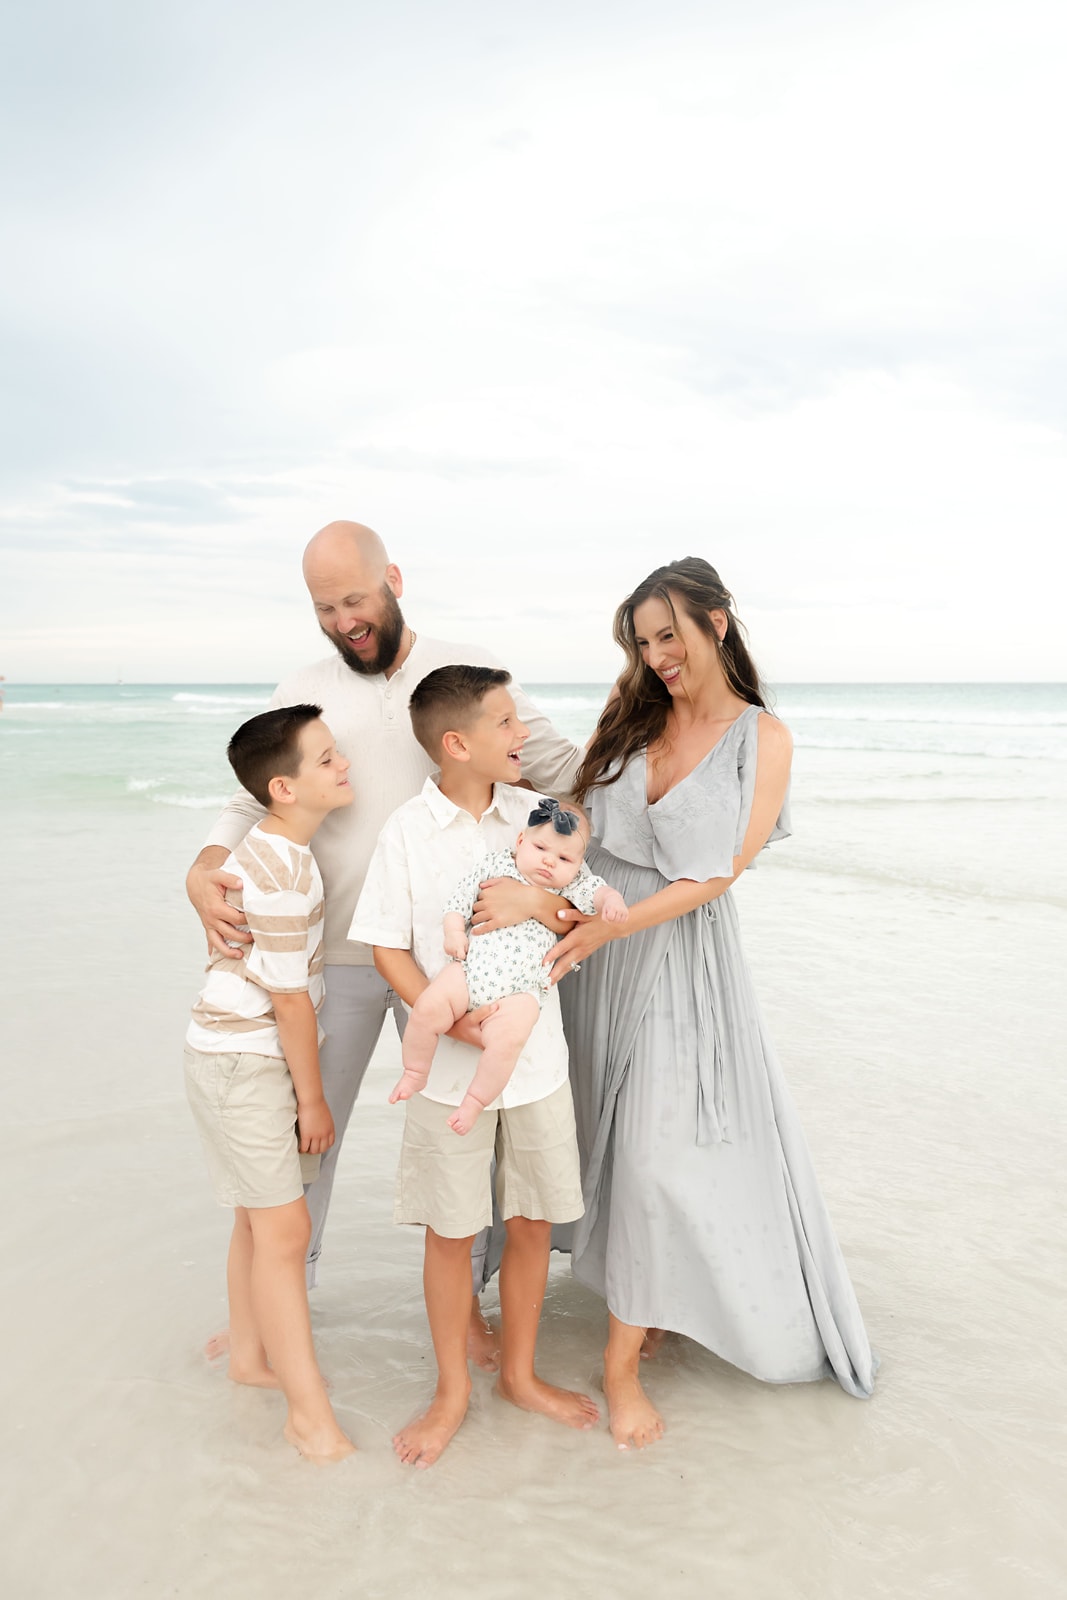 A family poses for a family photo on the beach.